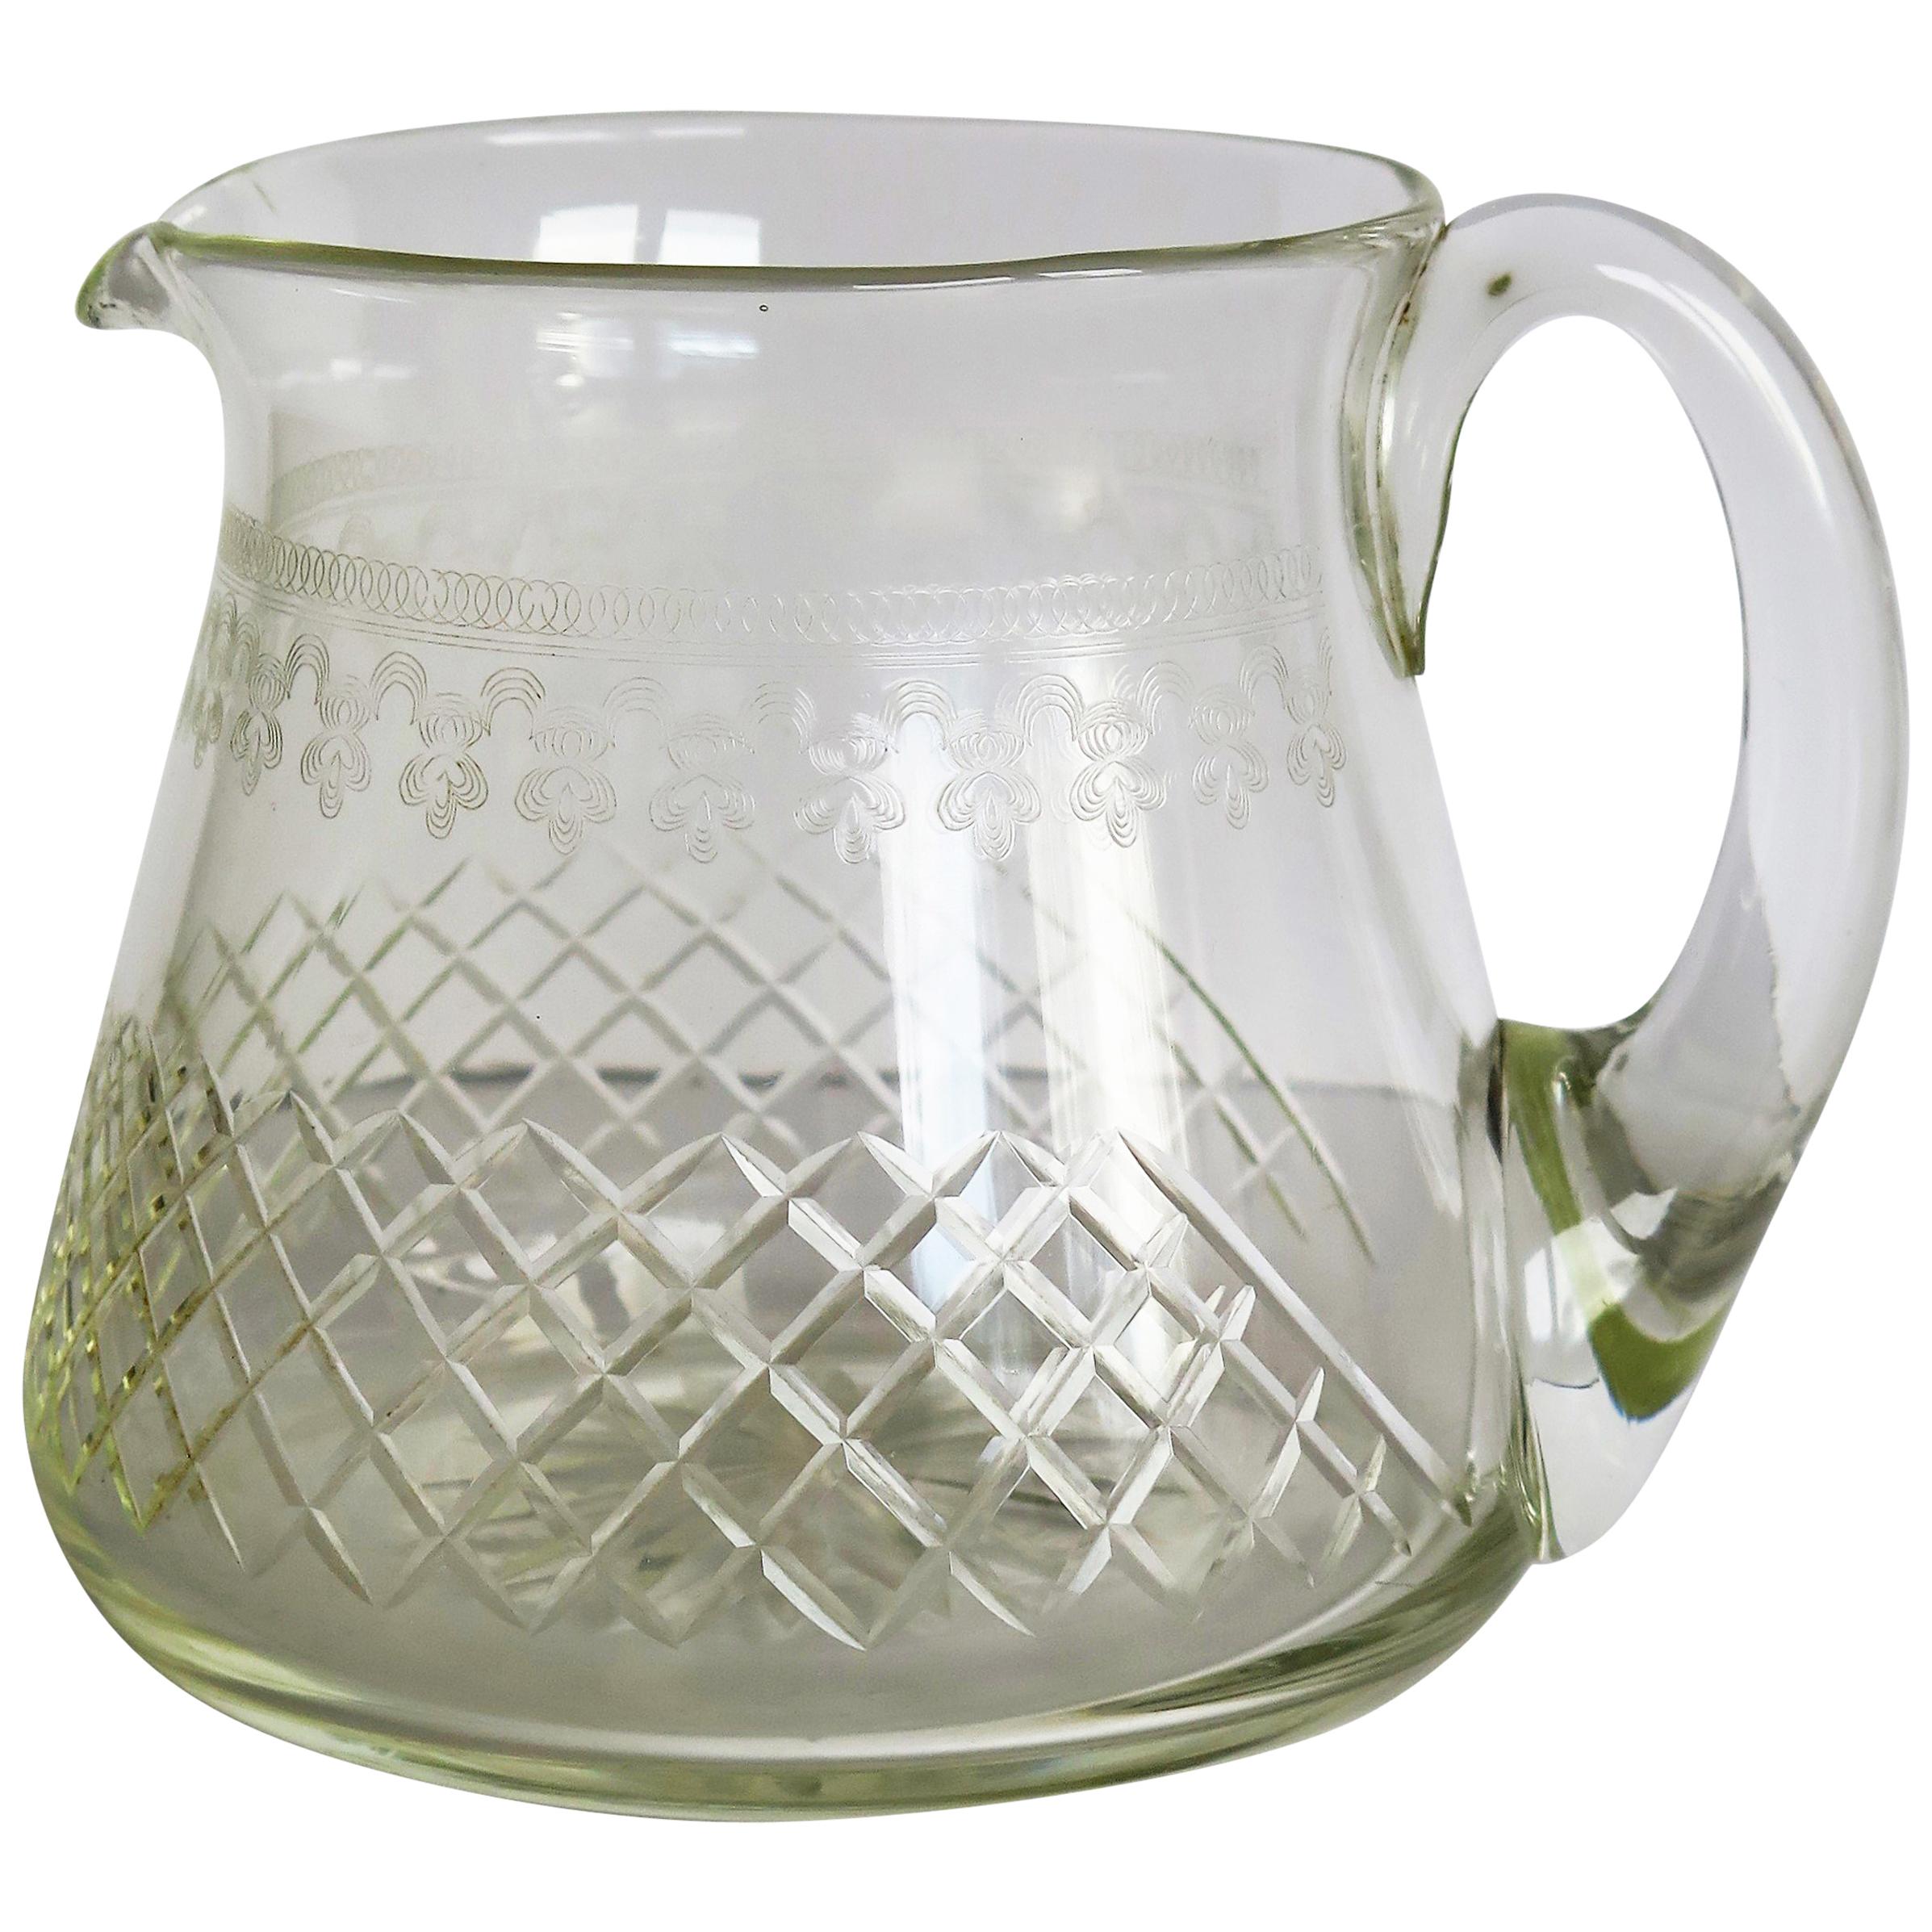 Edwardian Water Jug or Pitcher Crystal Lead Glass Cut and Engraved Holds 1.5 Pt